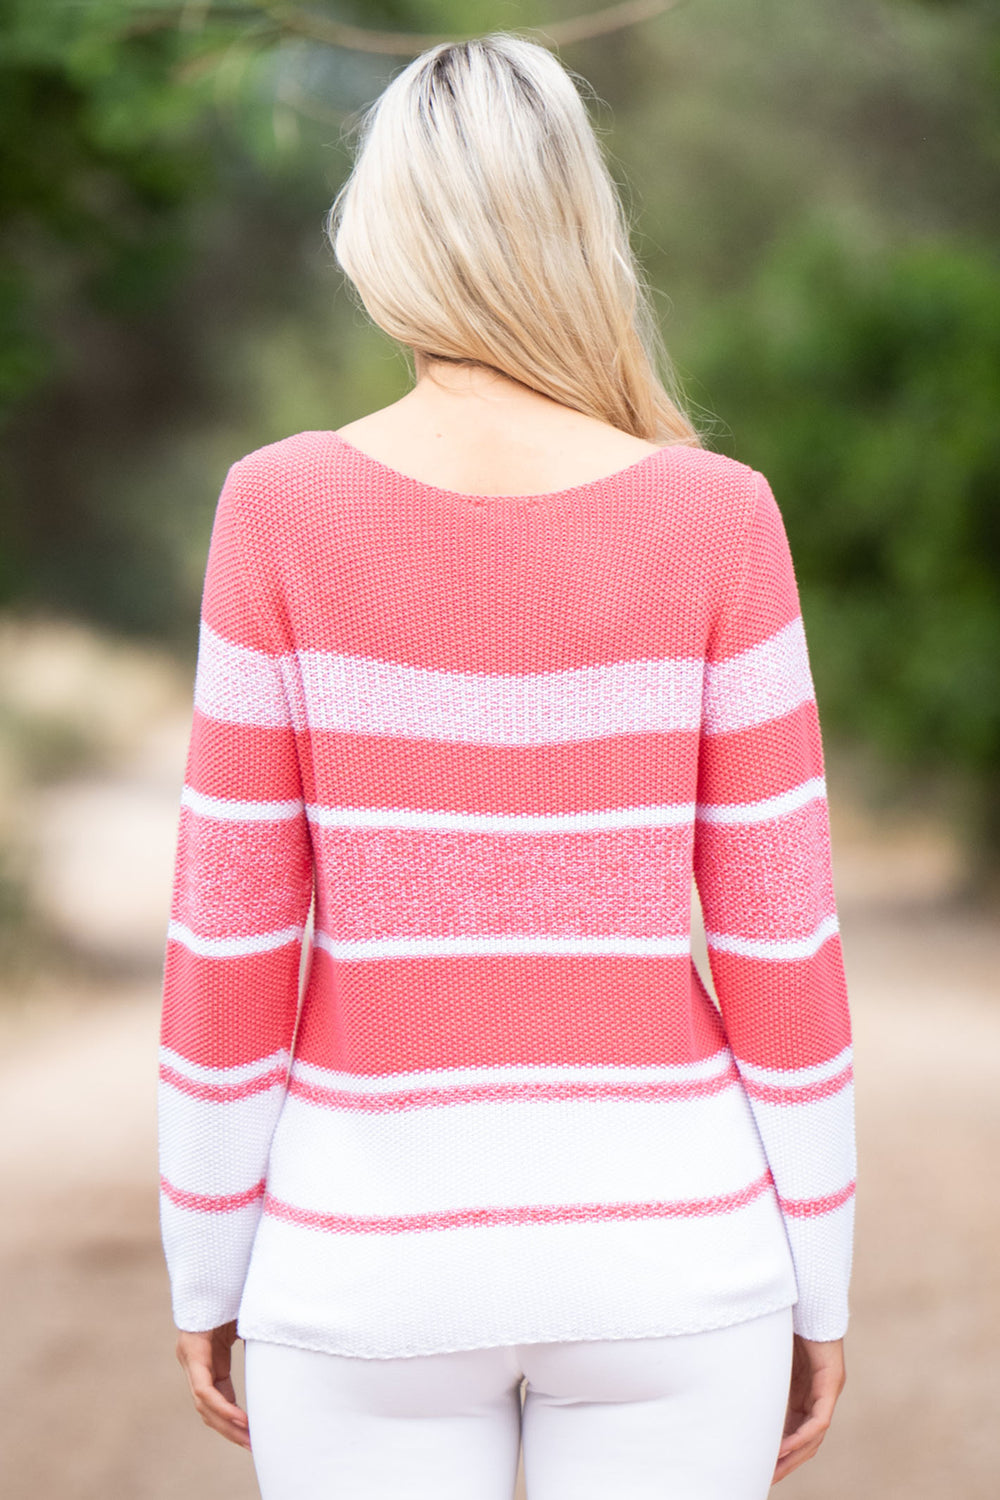 Marble Fashions 7445 135 Pink Stripe Wide Neck Jumper - Experience Boutique